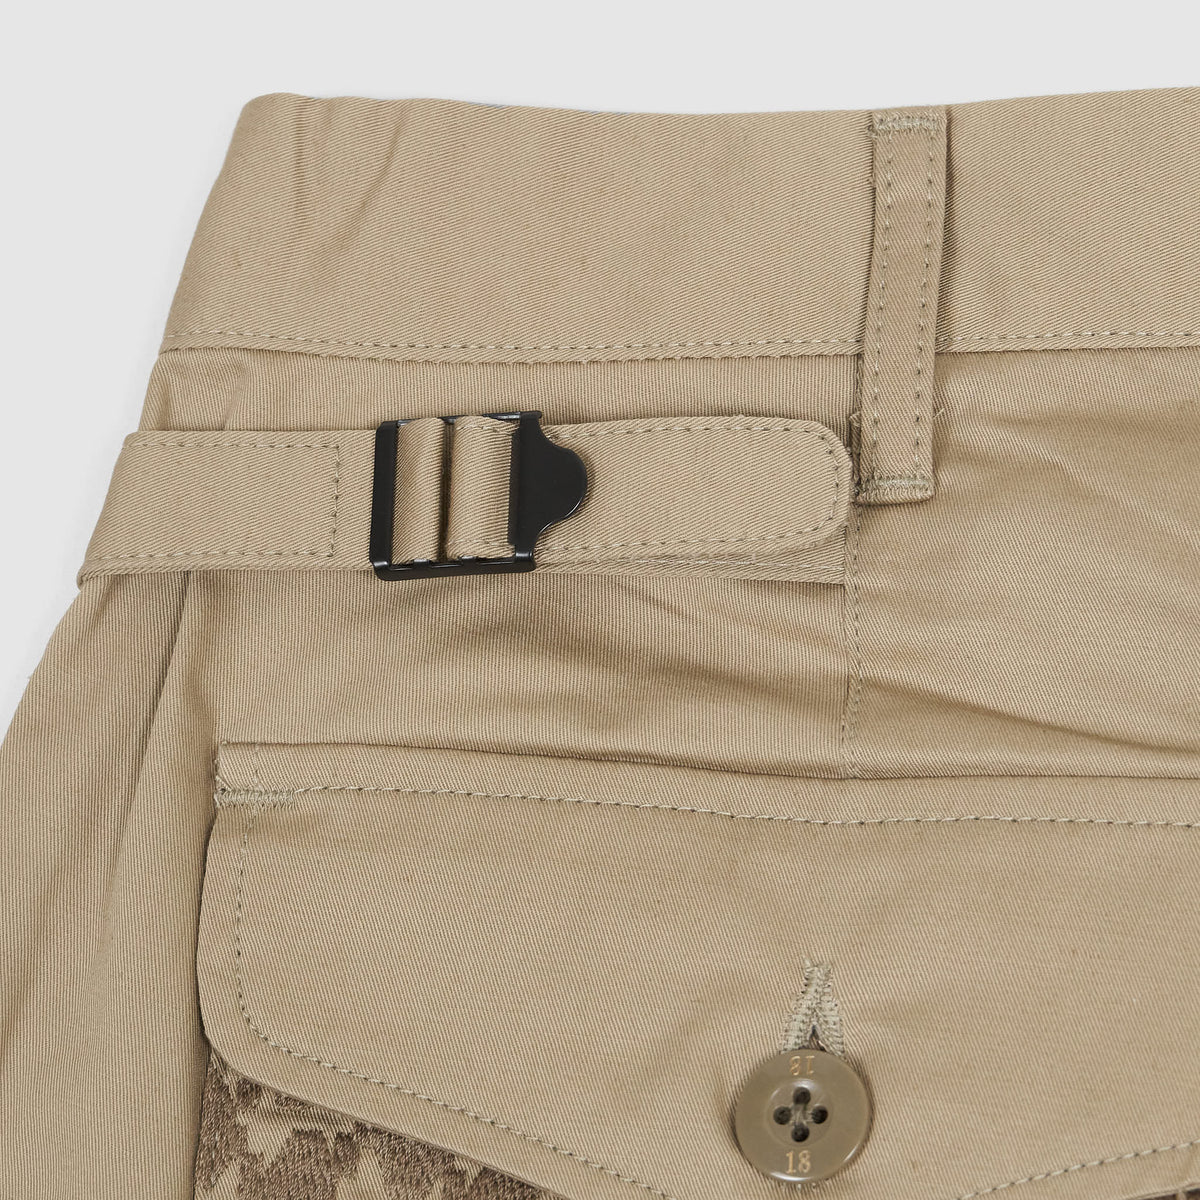 Neighborhood SMG Pleated Bermuda Shorts With Embroidered Pockets